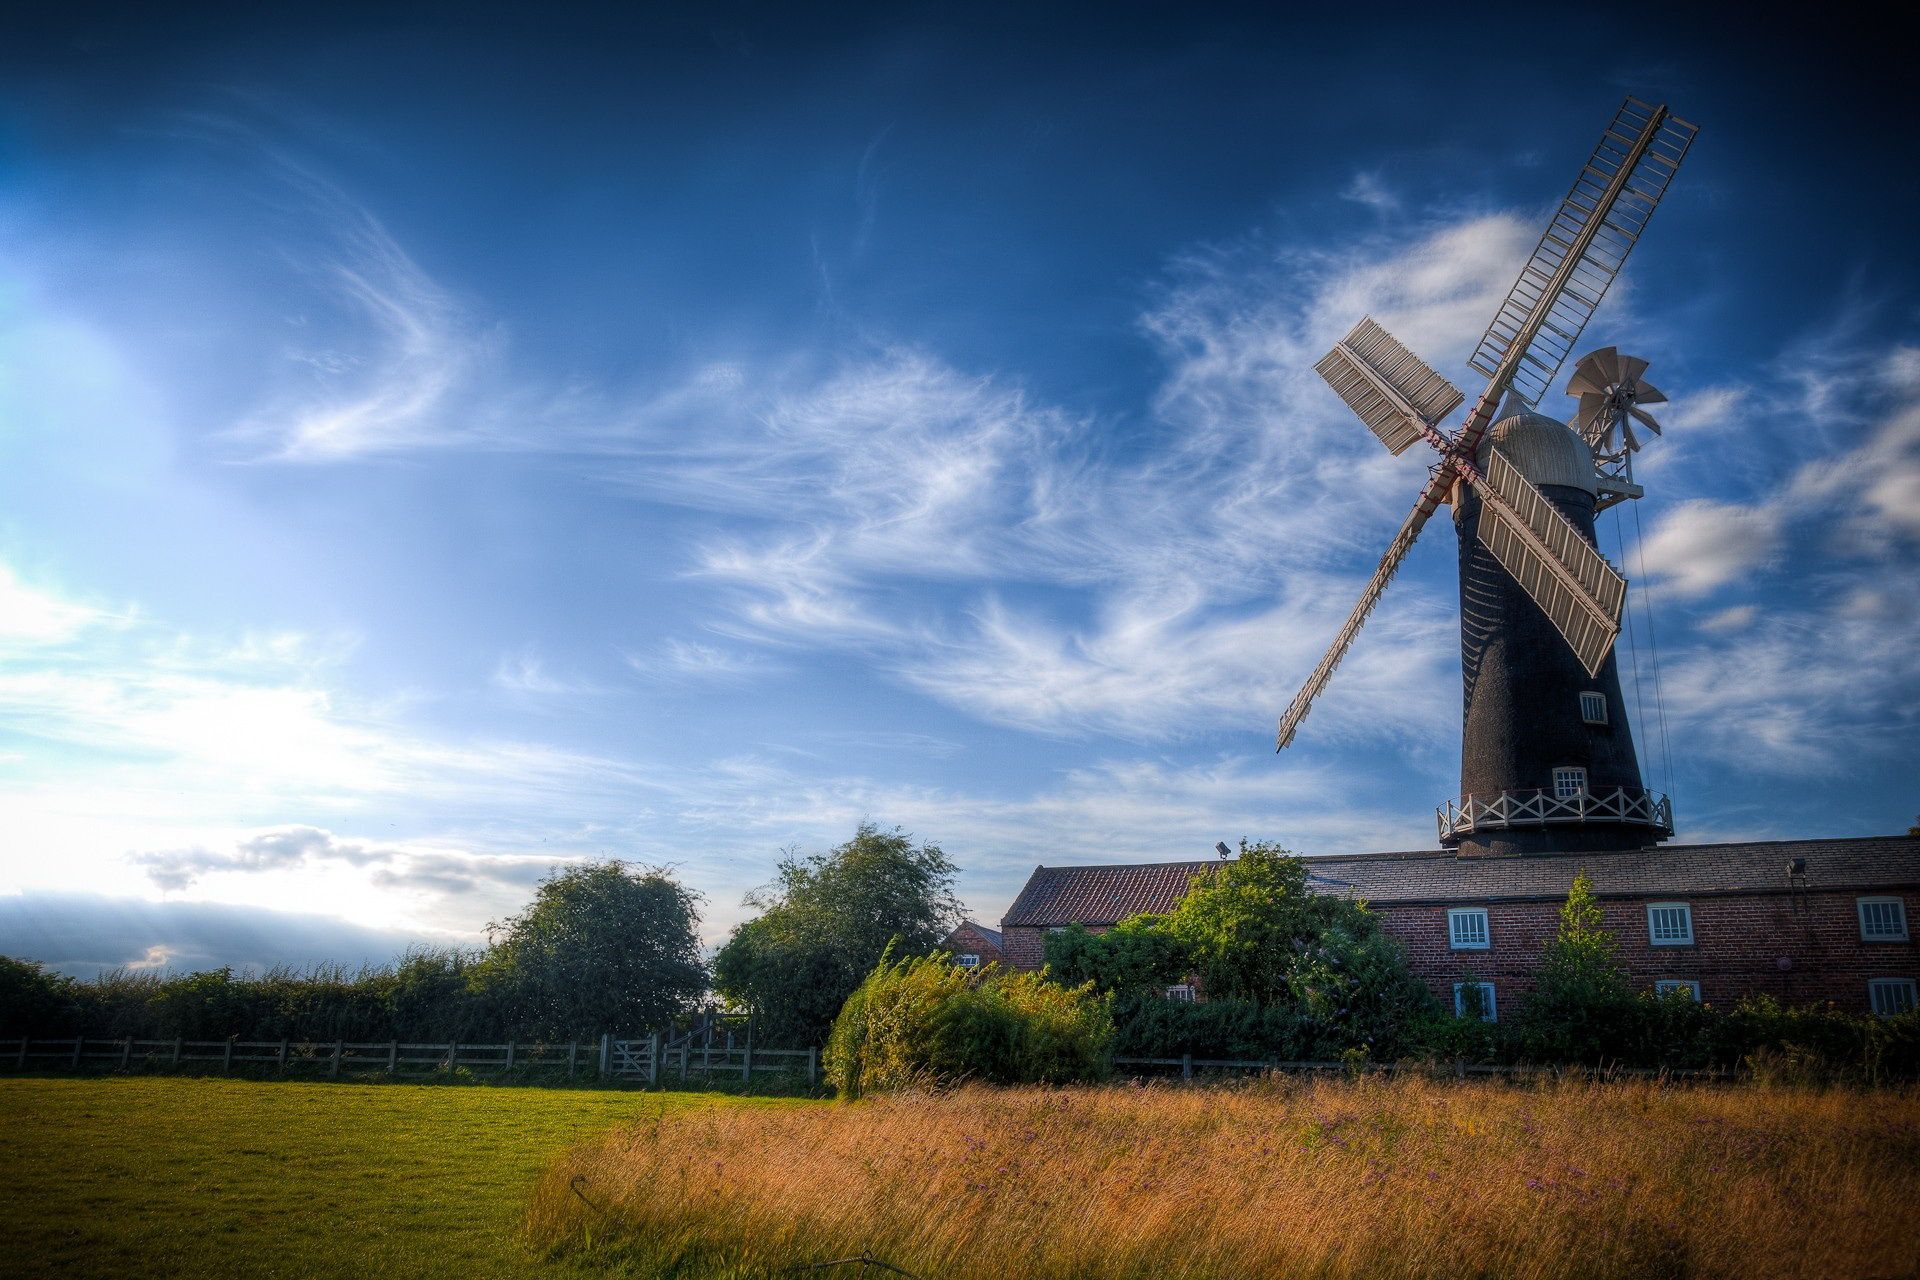 118 Windmill HD Wallpapers Backgrounds - Wallpaper Abyss